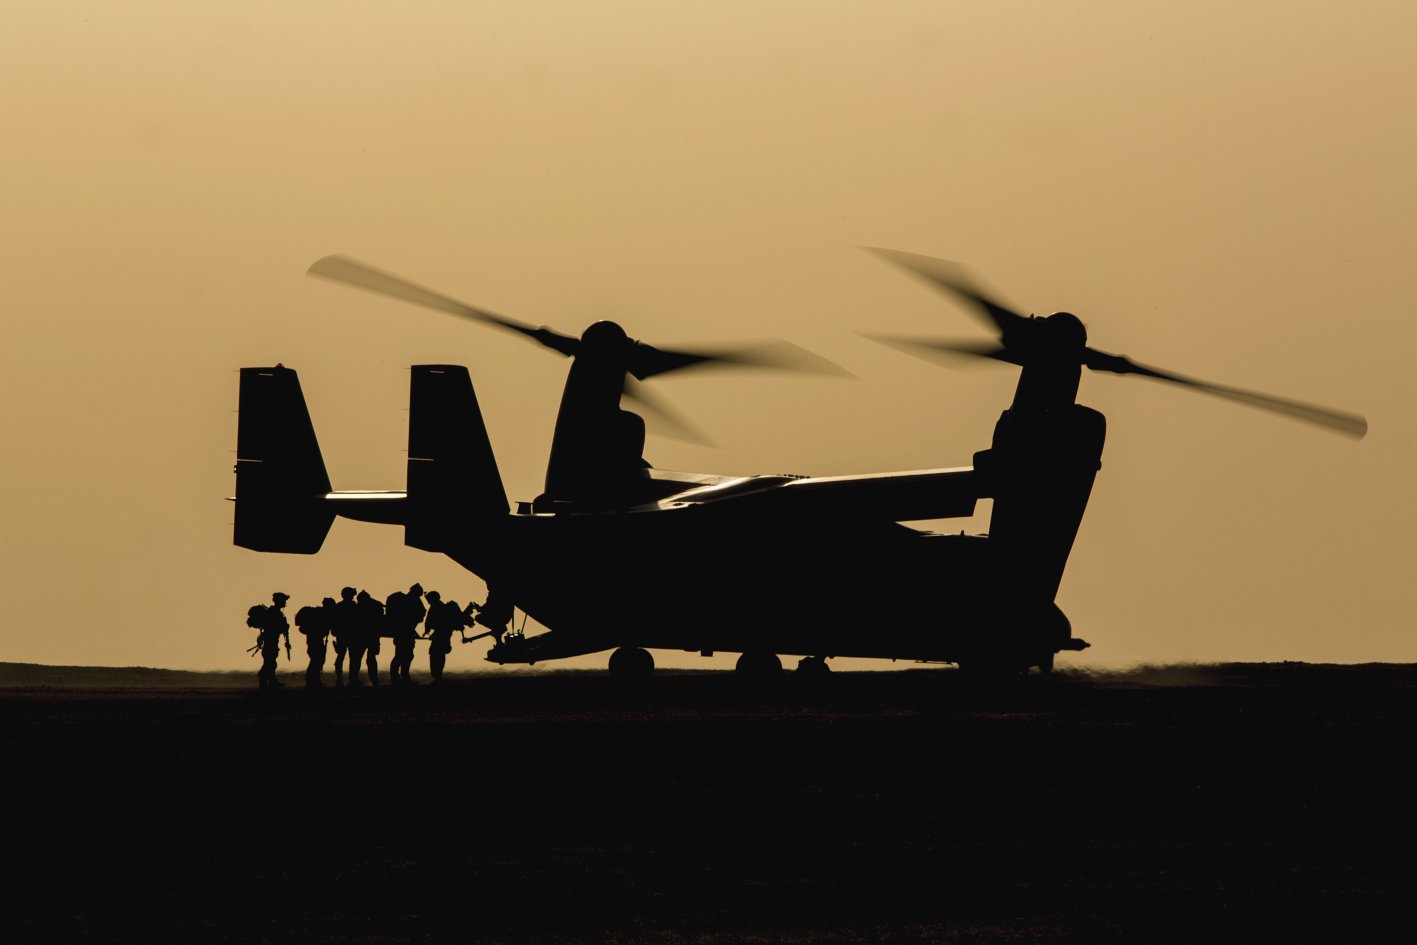 Interest in the V-22 Osprey is continuing to grow in the Middle East, as forces look to deploy expeditionary operations. (US Marine Corps/Cpl. Trever Statz)